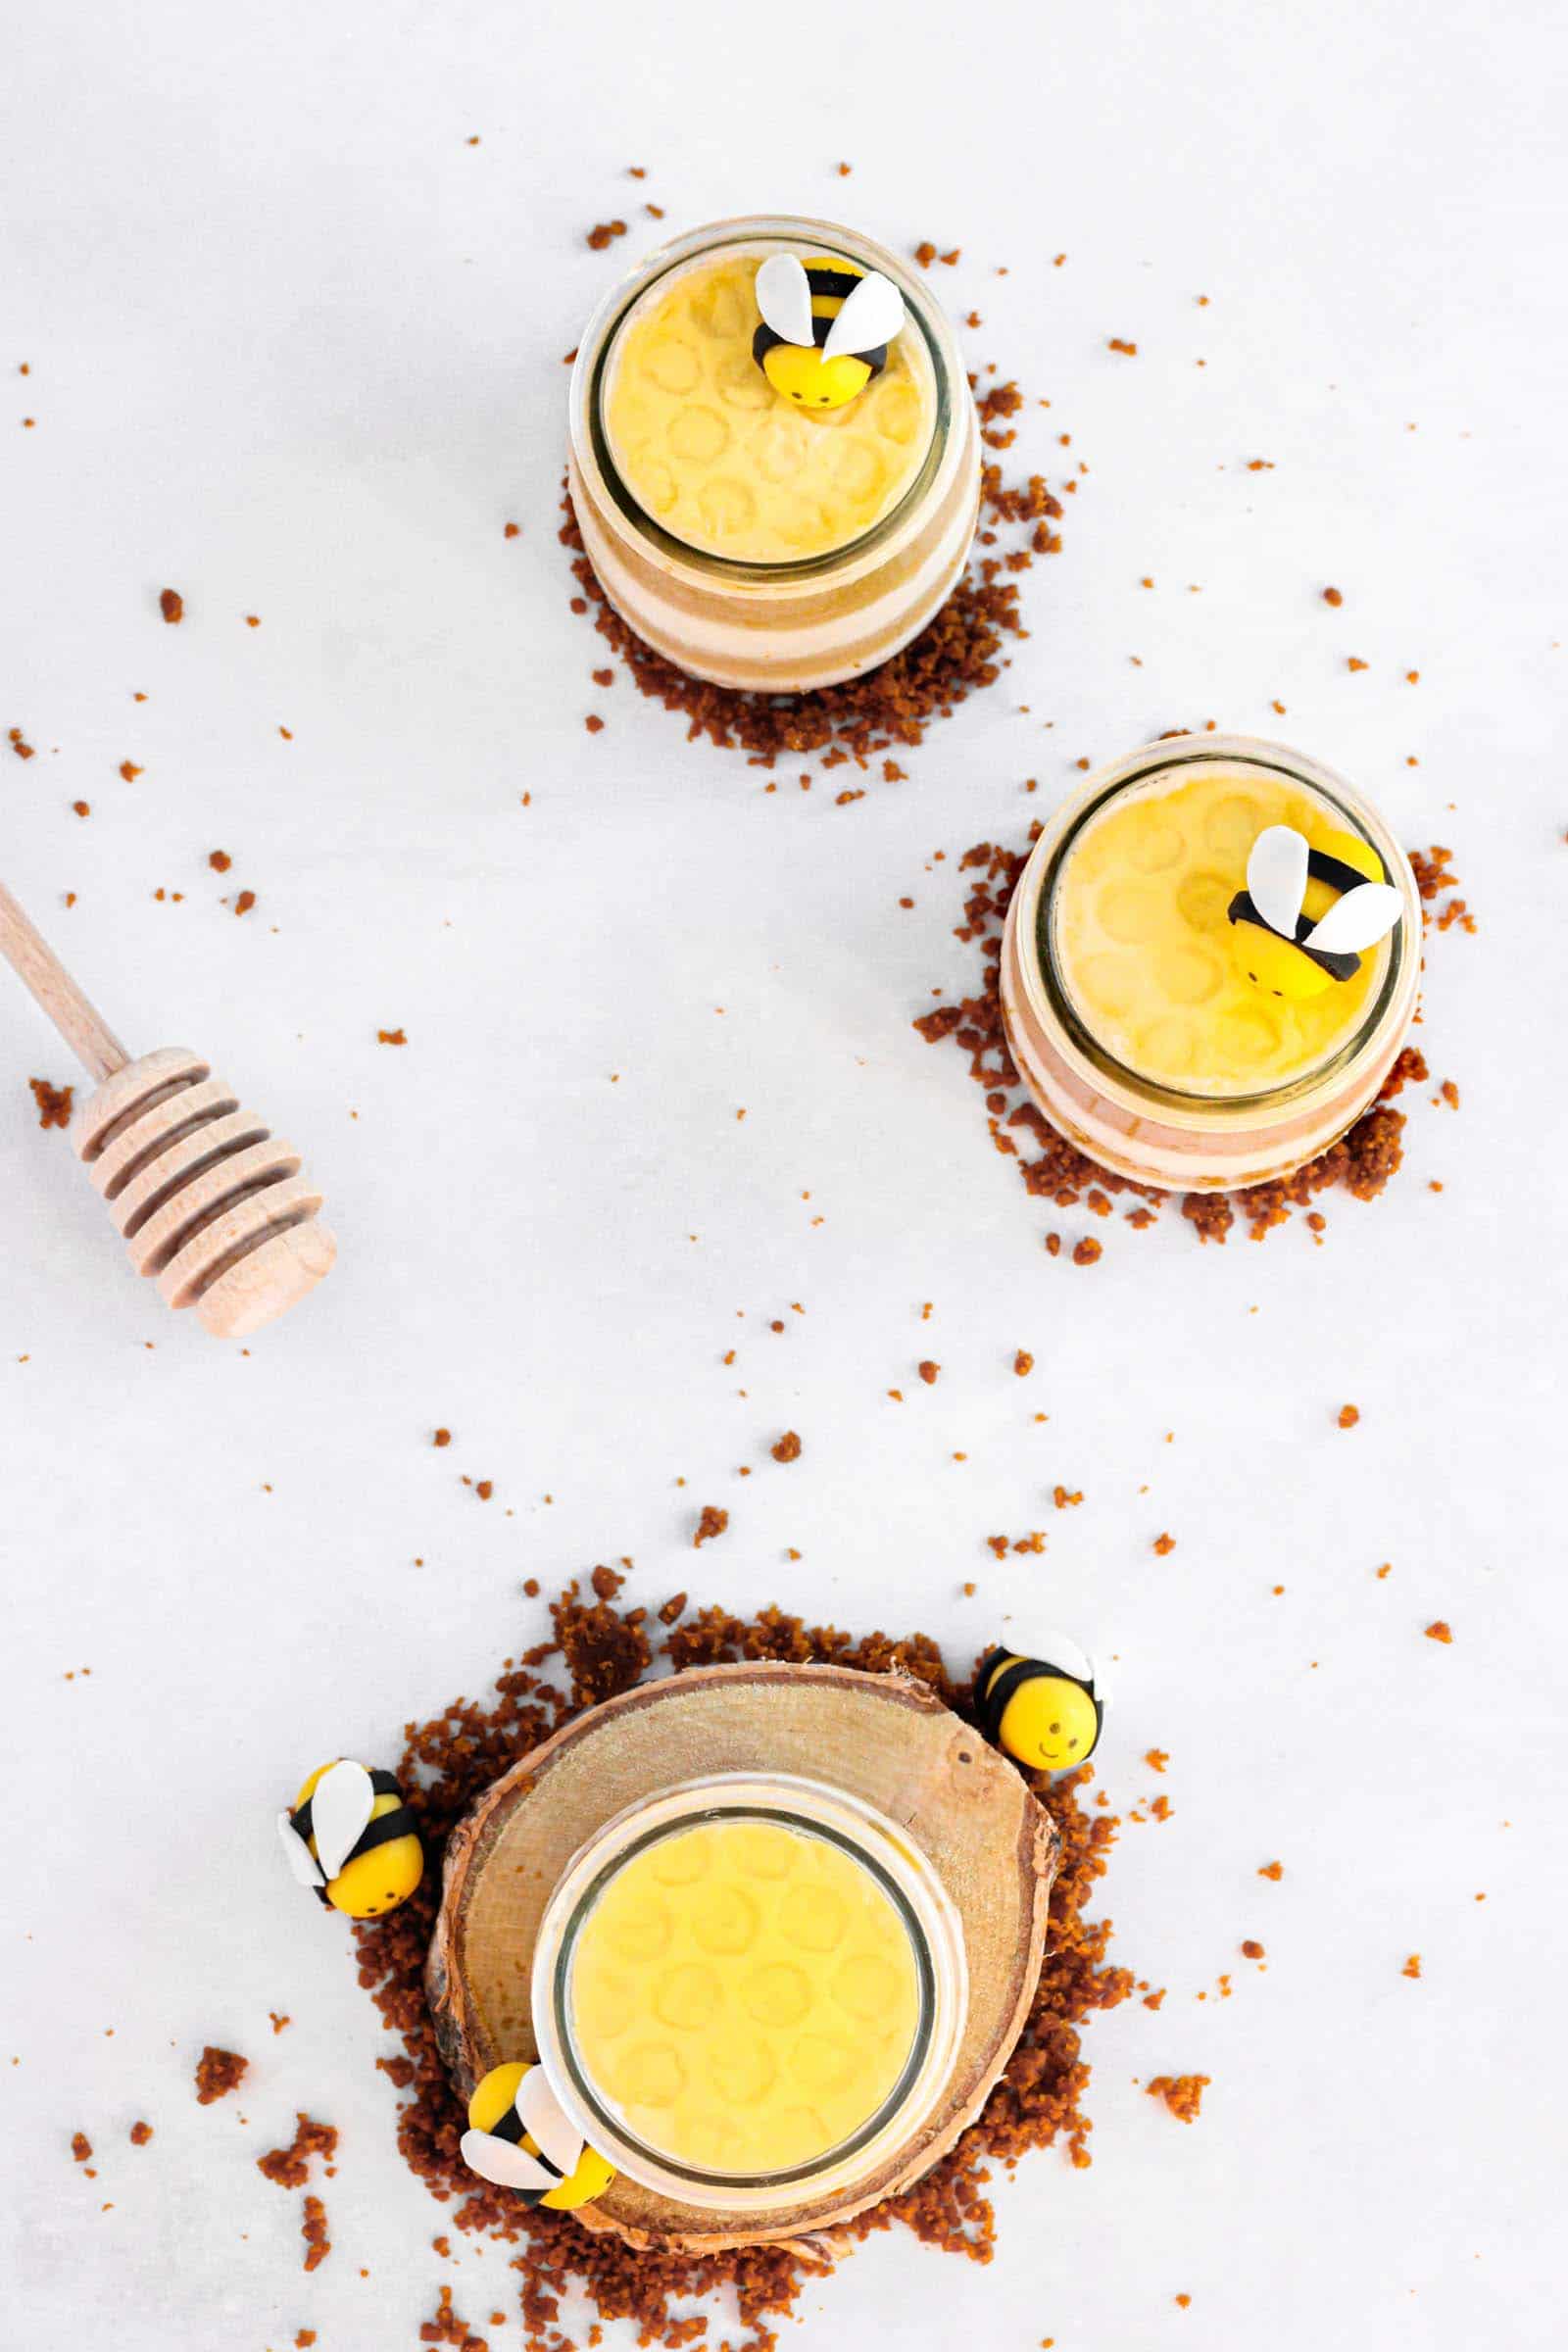 honeycomb-shaped coconut pineapple cheesecakes made with layers of coconut cheesecake and pineapple juice jelly